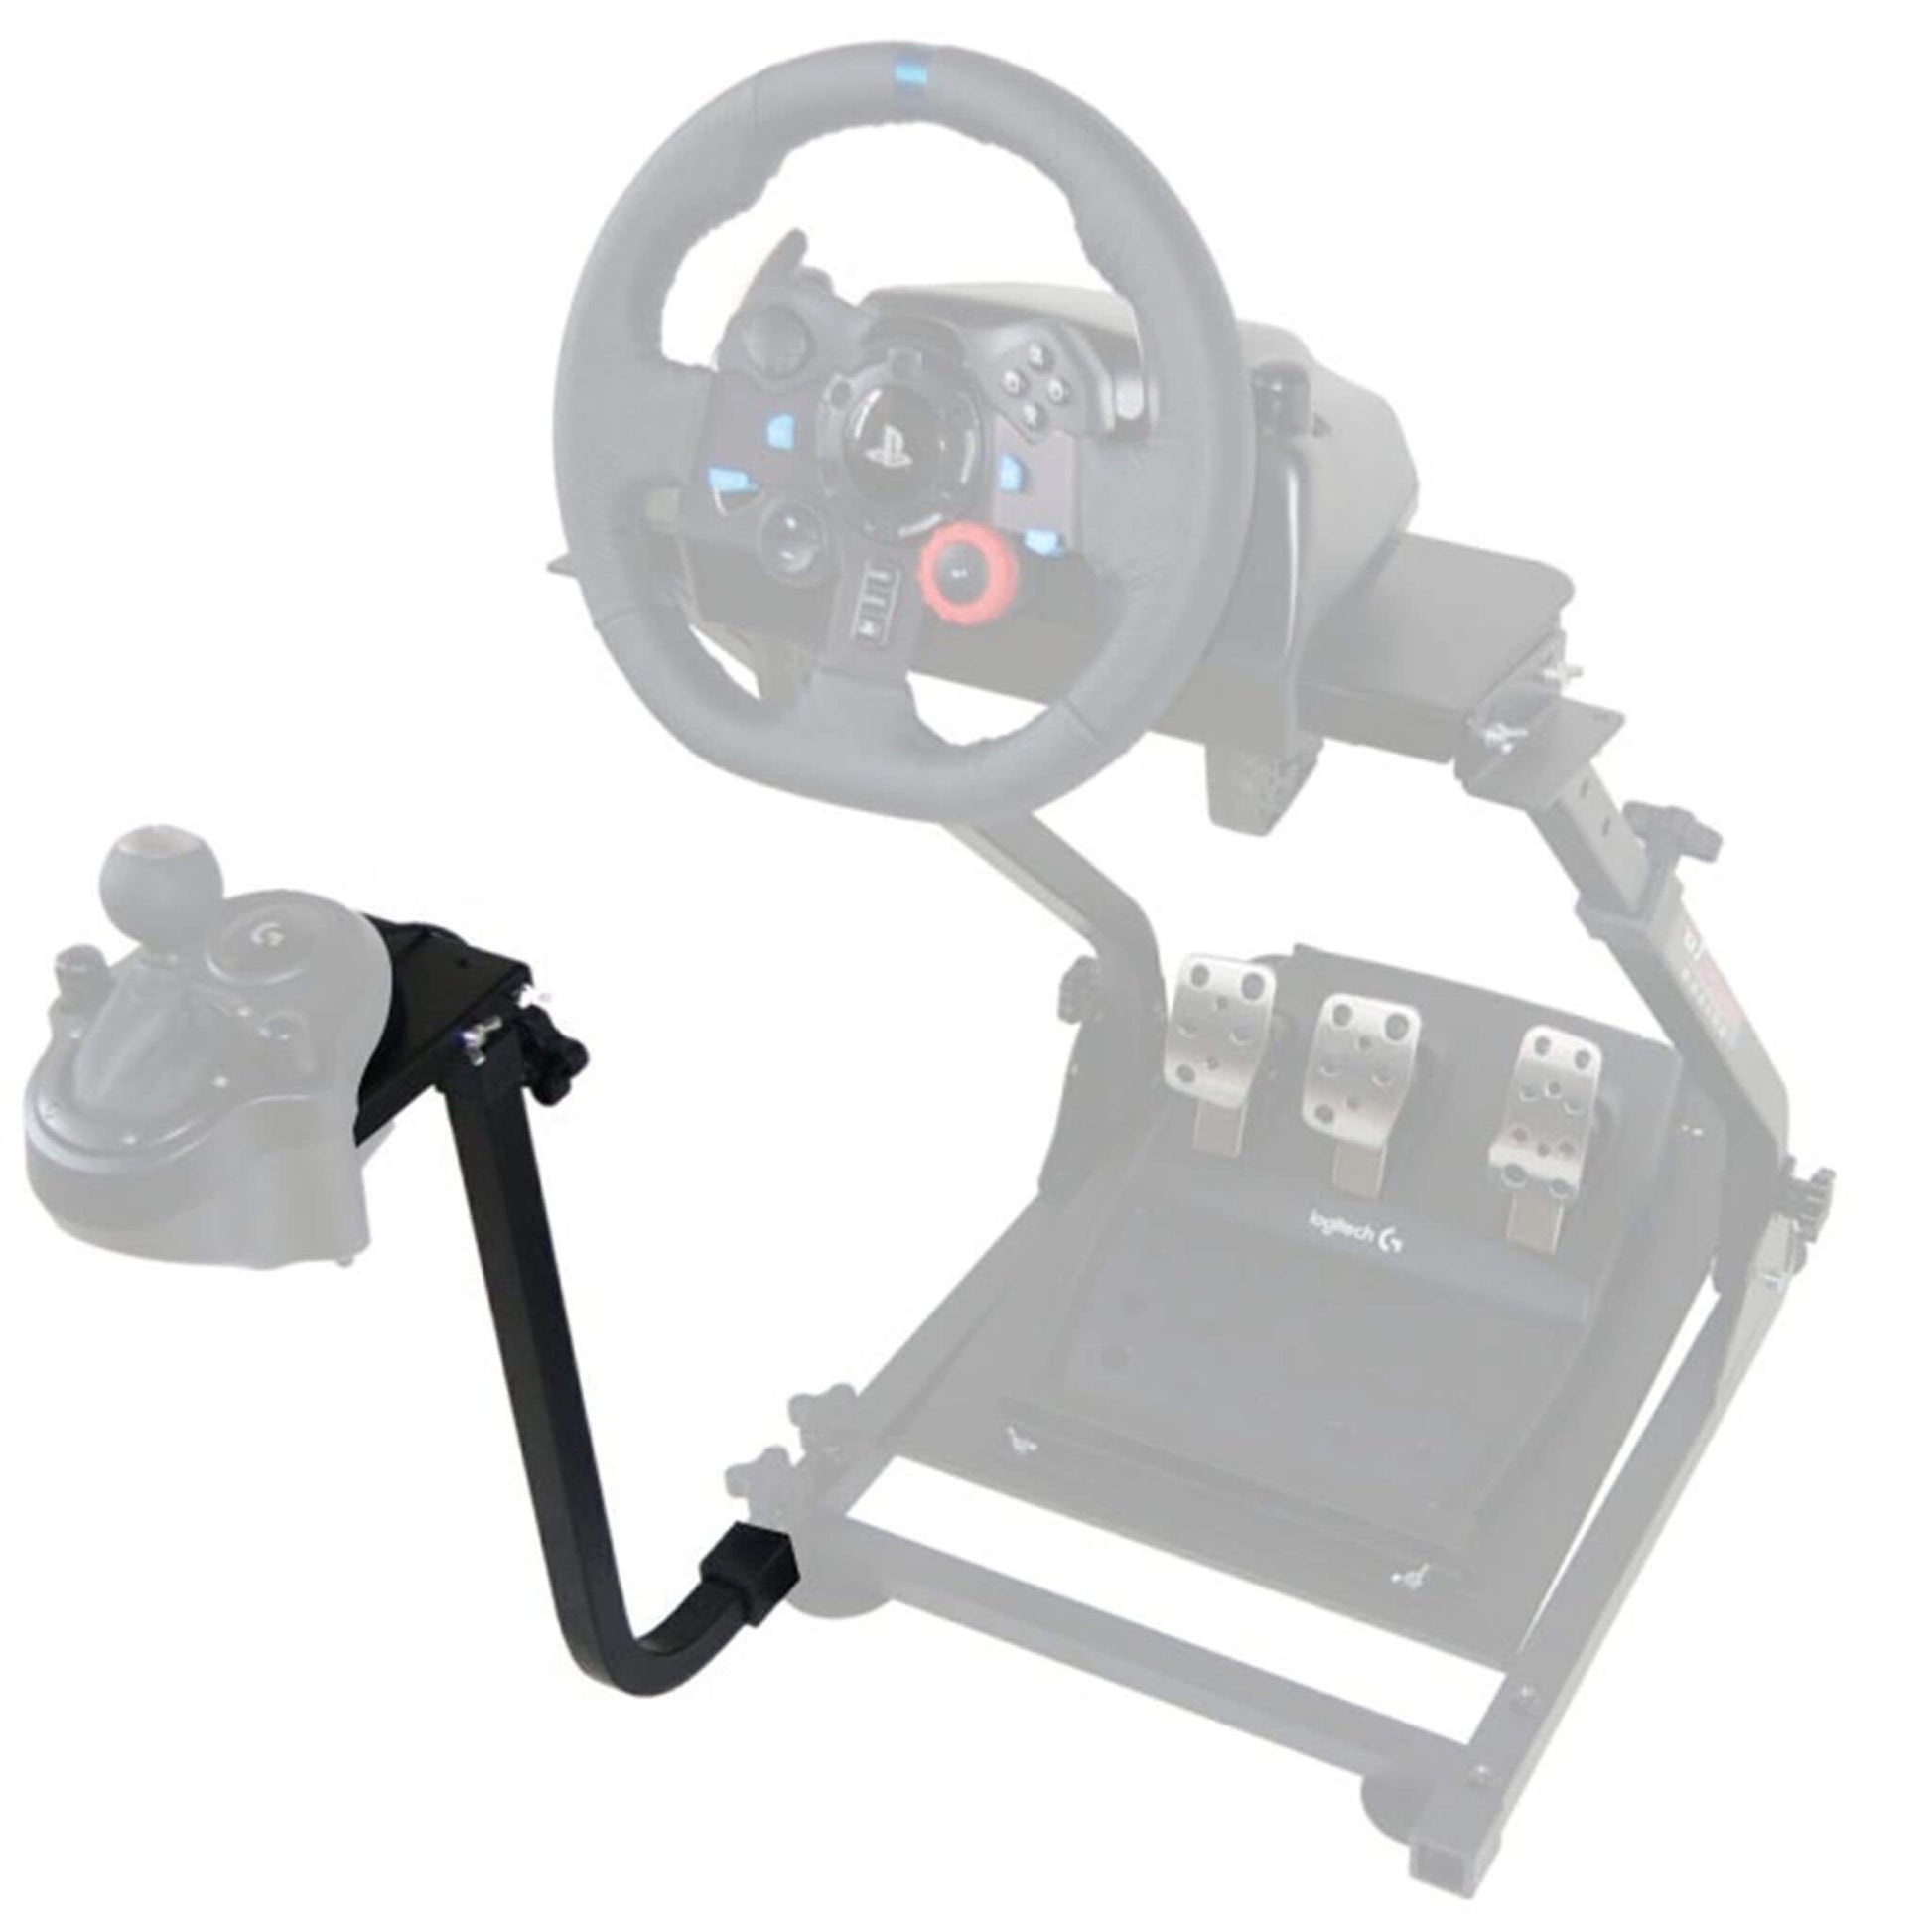 GT Omega Steering Wheel stand For Logitech G29 Racing & Driving